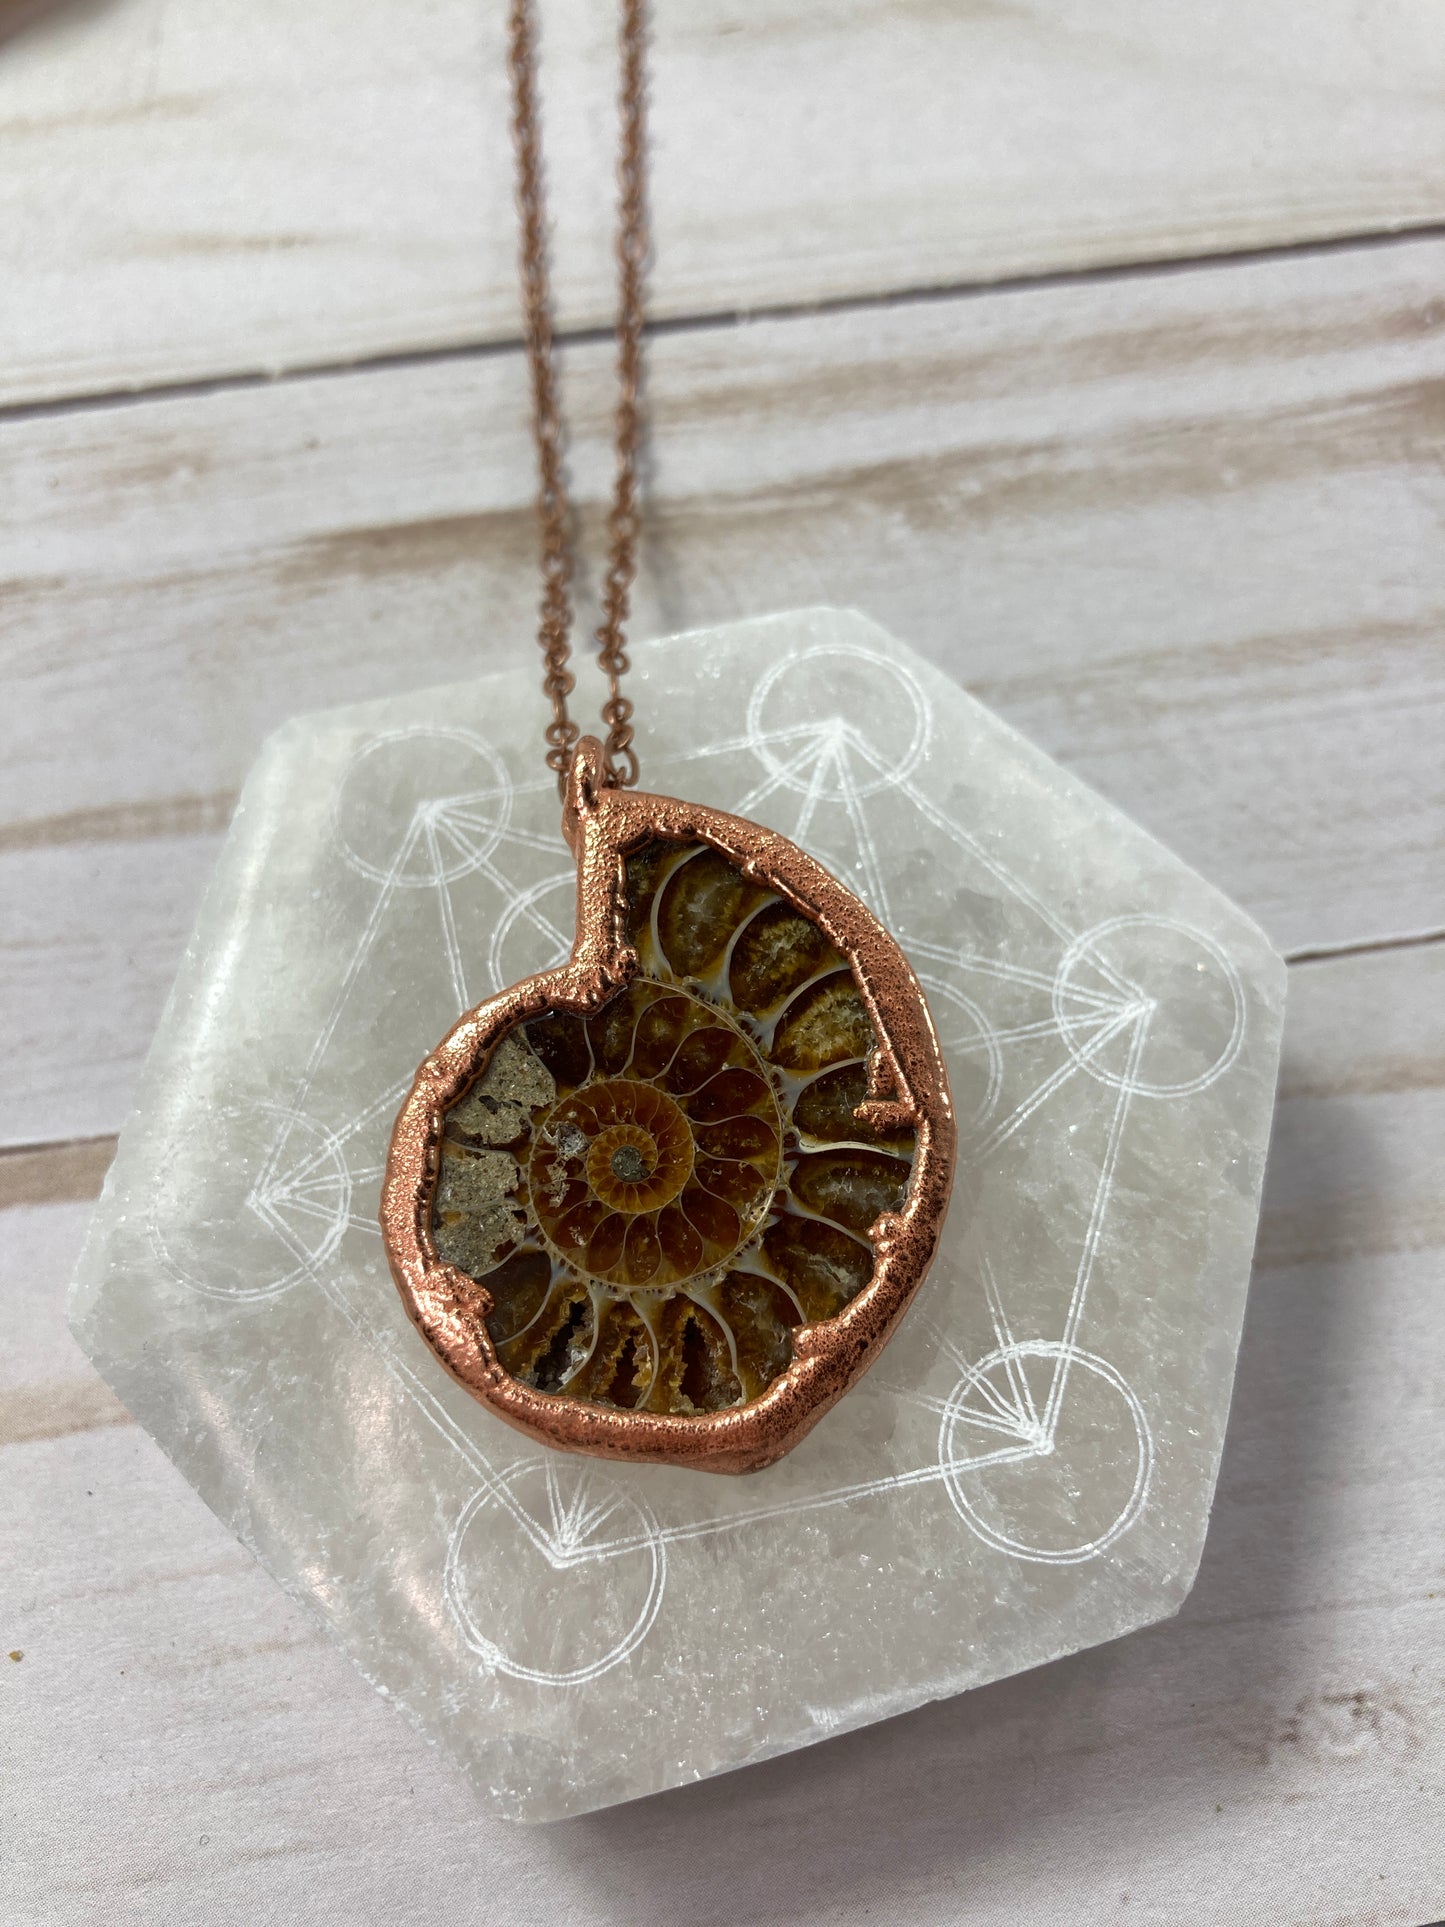 Ancient Ocean Necklace ۞ Electrofomed Ammonite Fossil Necklace